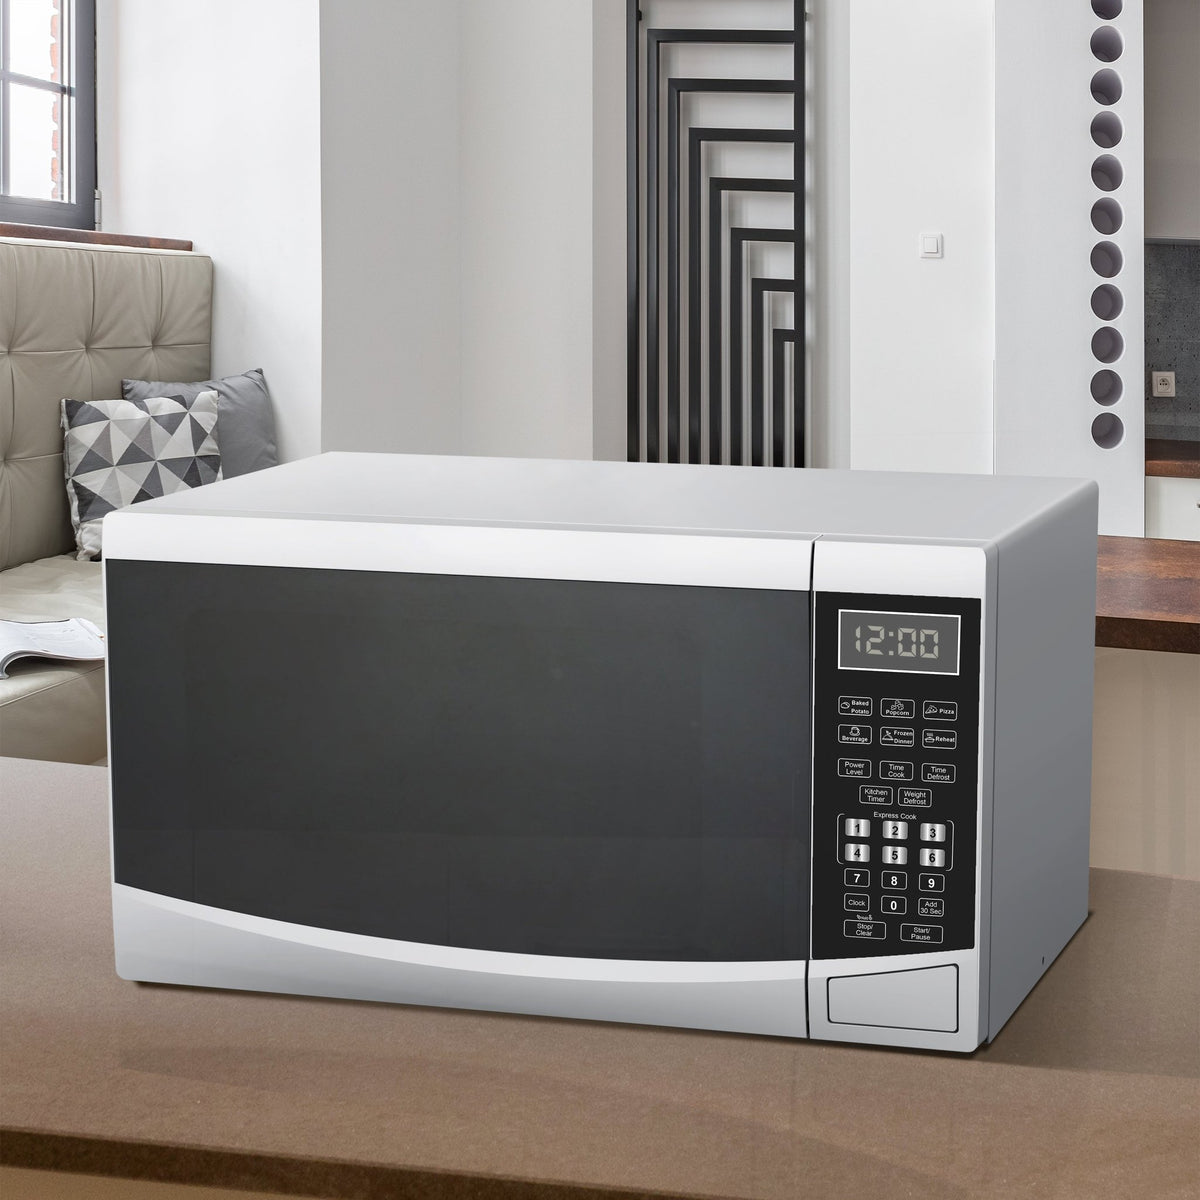 West Bend 0.7 Cu. ft. Microwave Oven White